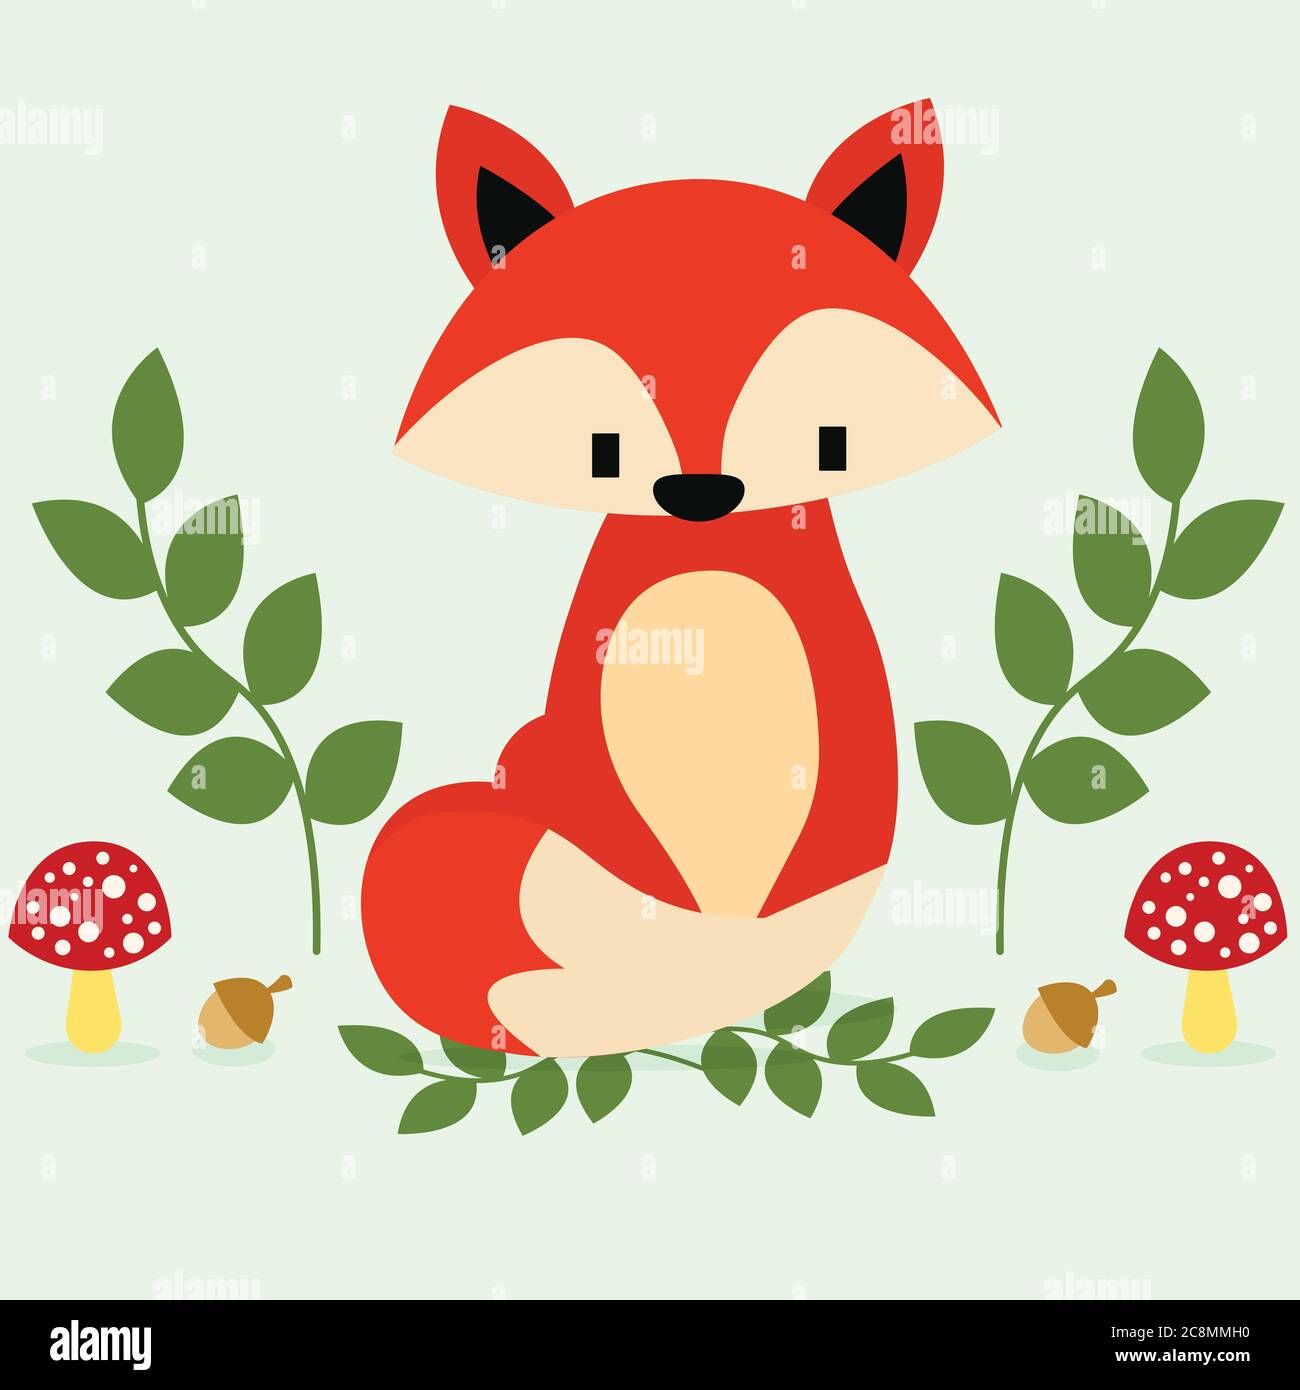 Cute Red Fox Animal Character Design With Mushrooms And Leaves Stock Vector  Image & Art - Alamy